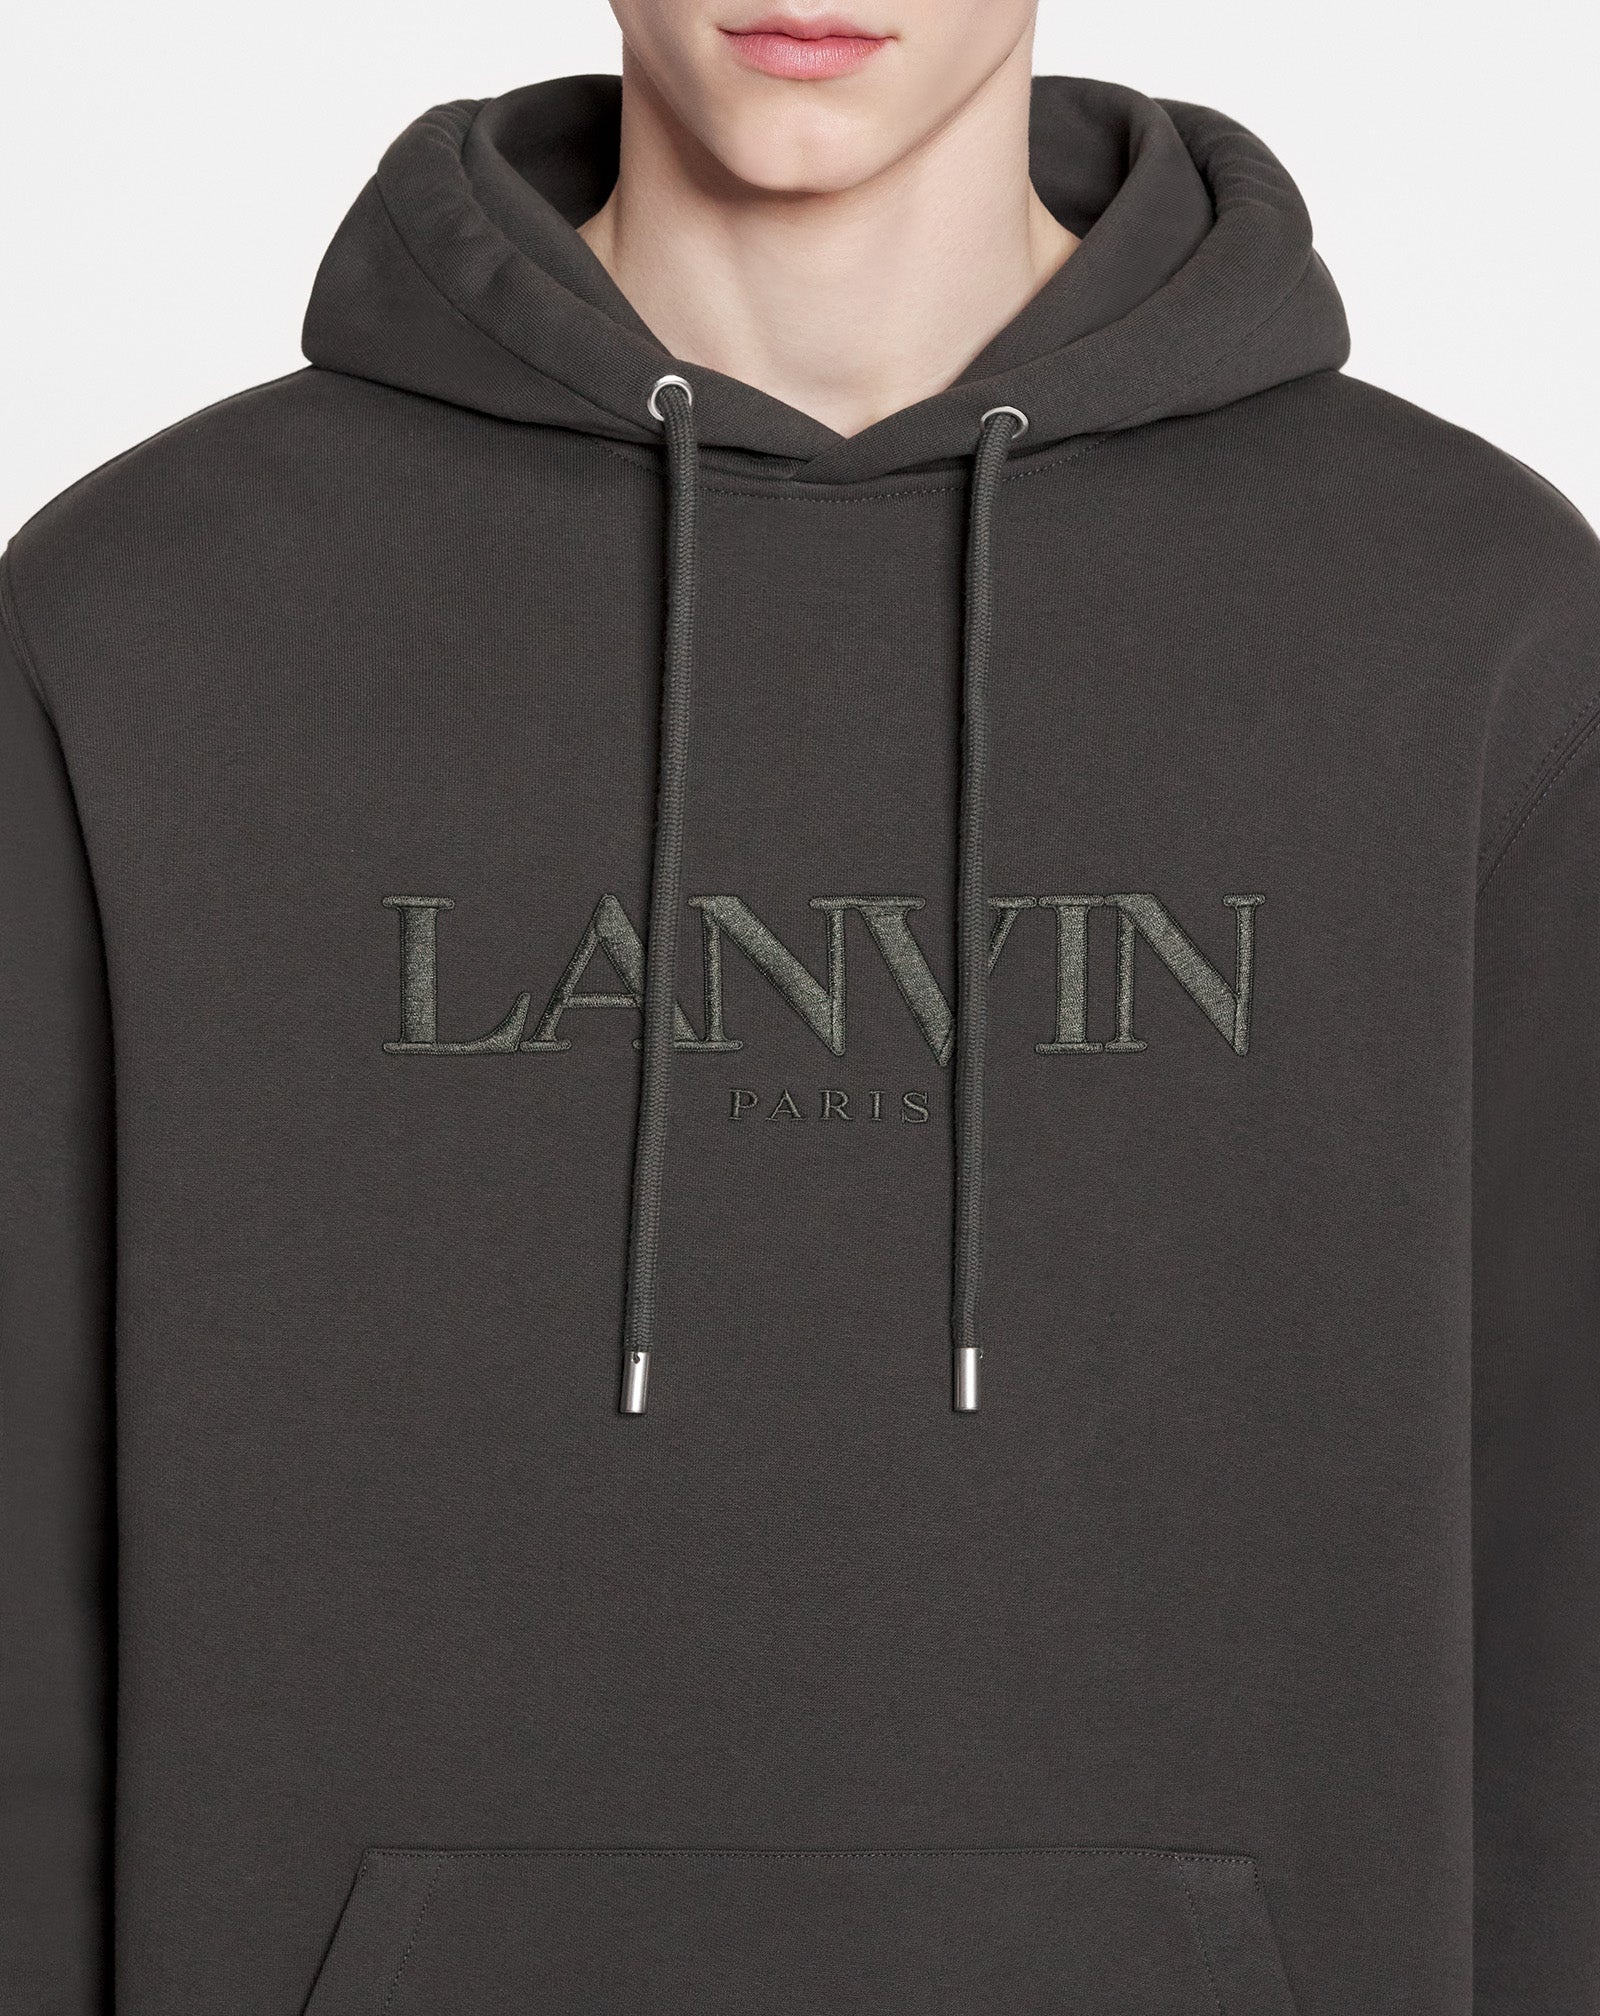 OVERSIZED LANVIN PARIS EMBROIDERED HOODIE - 5